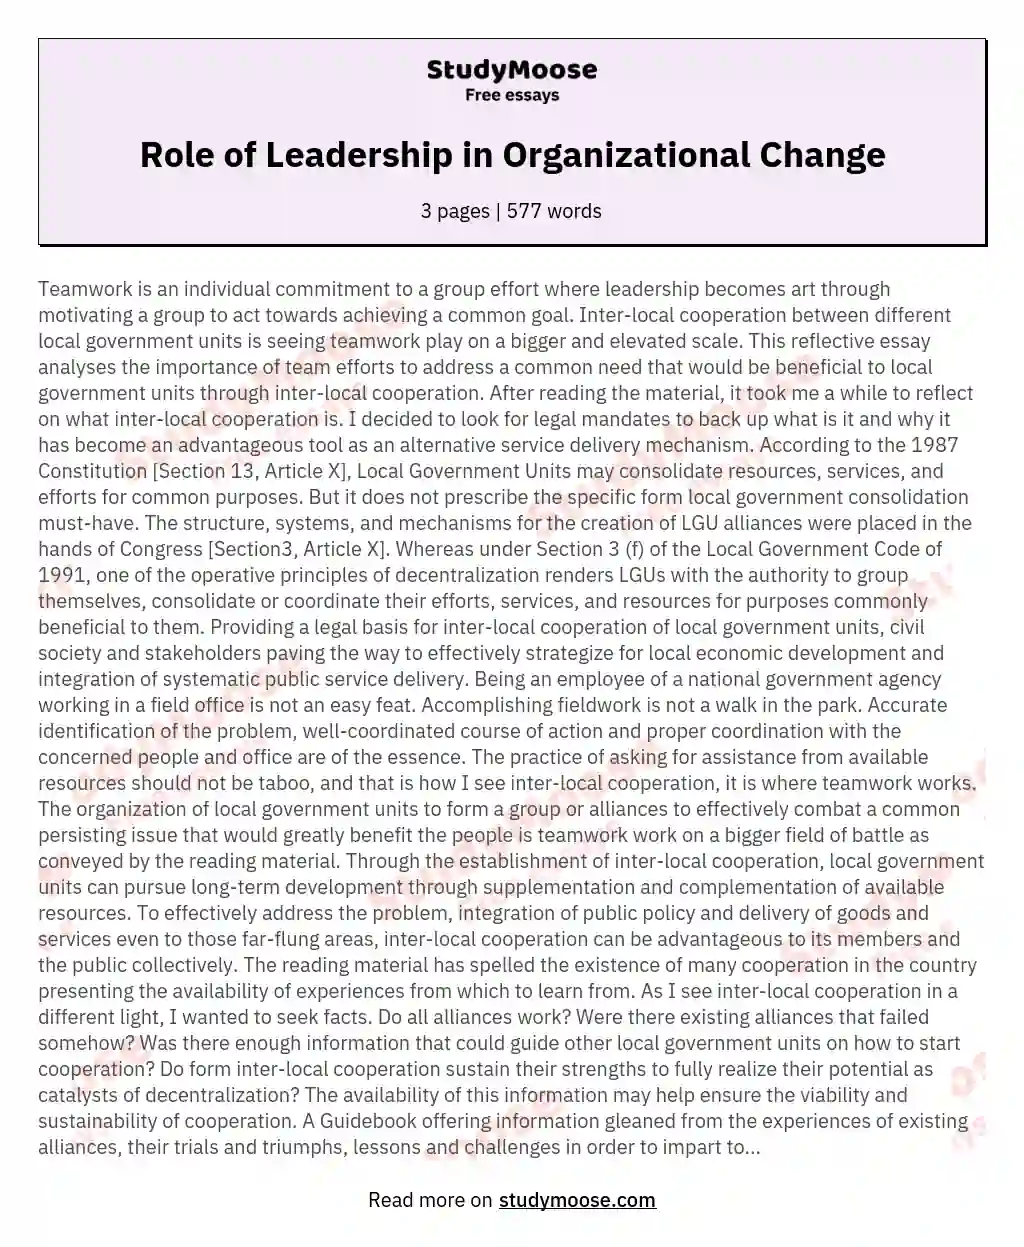 Role of Leadership in Organizational Change